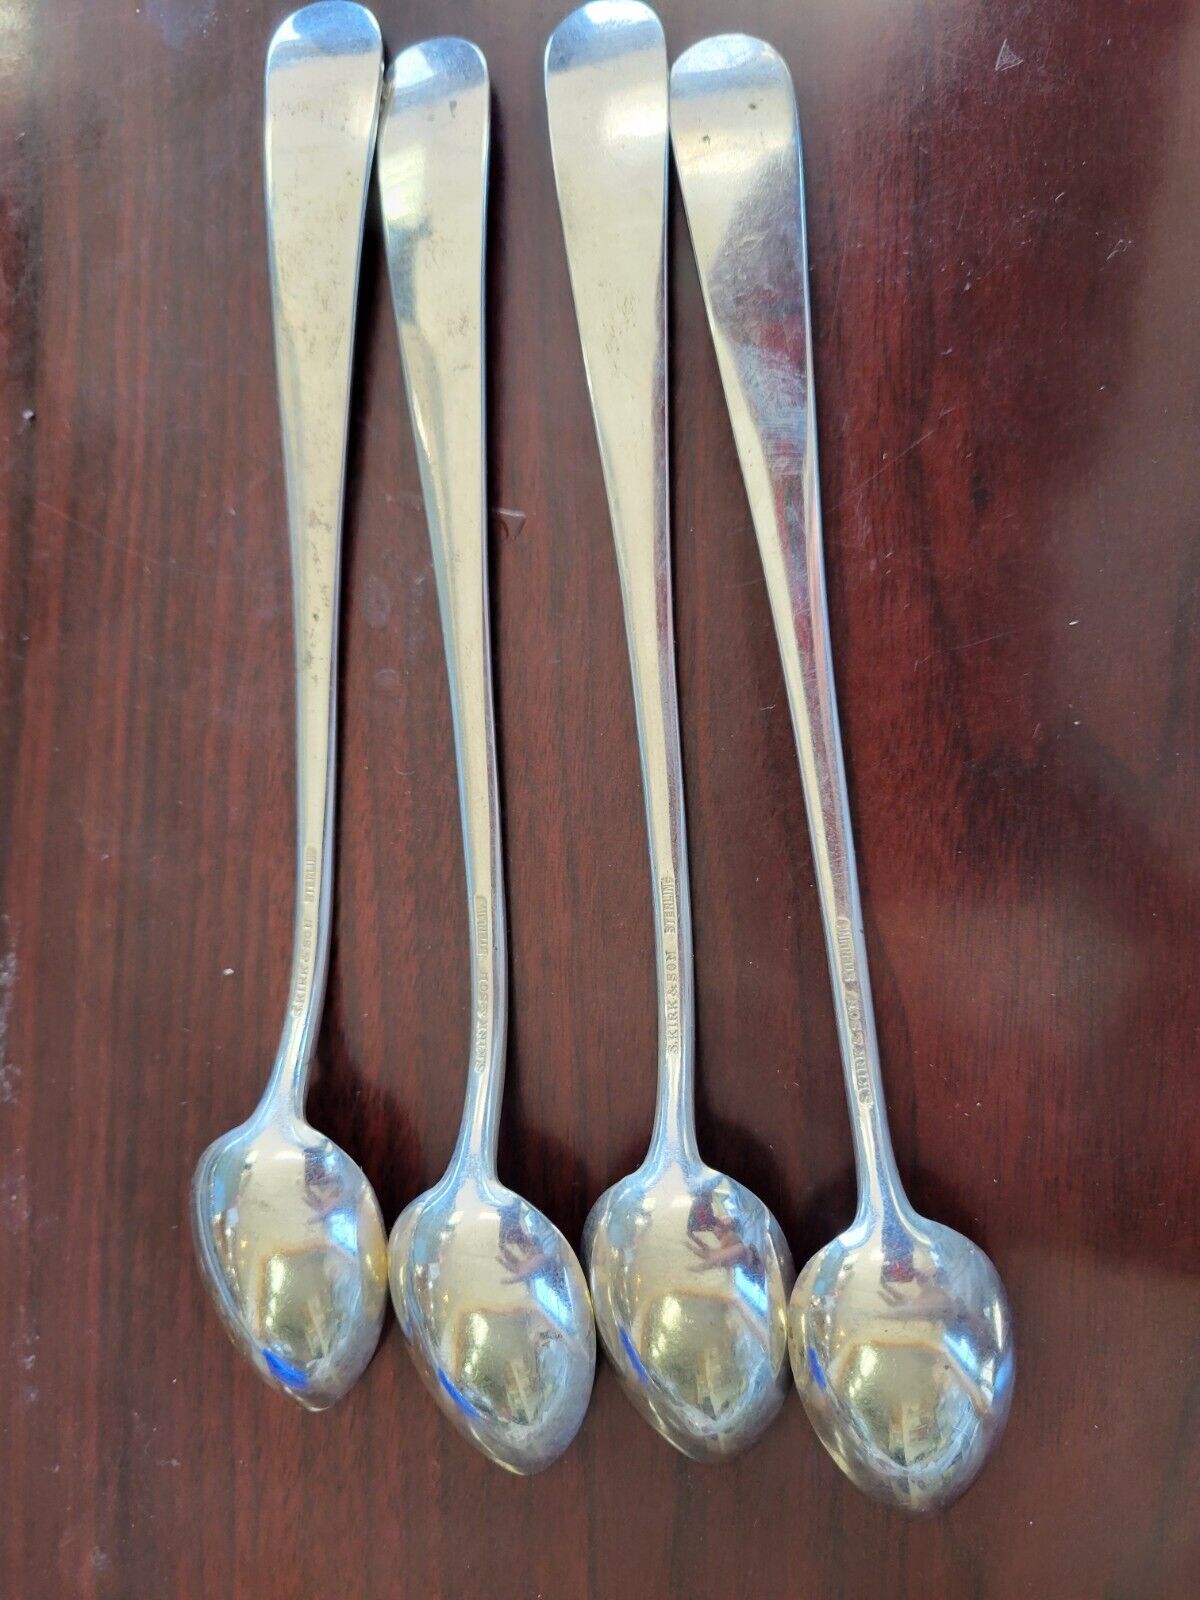 Repousse by Kirk & Sons Sterling Silver 7 1/2" Iced Tea Spoons 4.8oz.